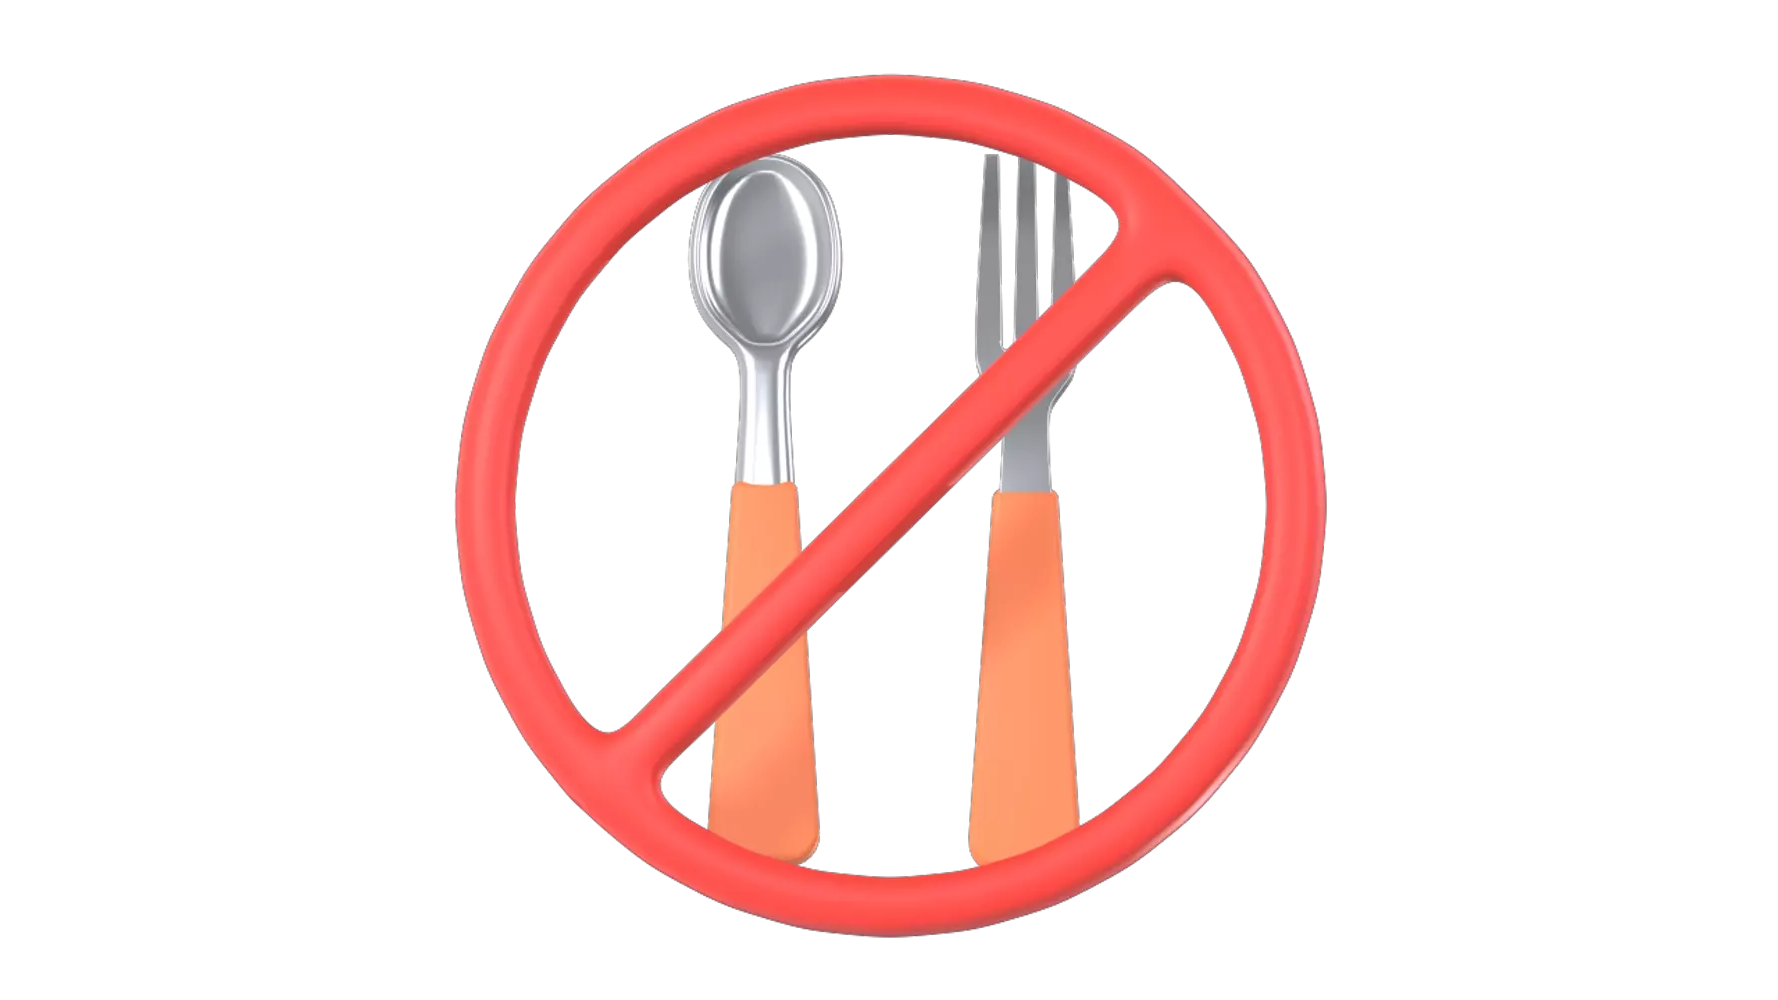 No Eating 3D Graphic